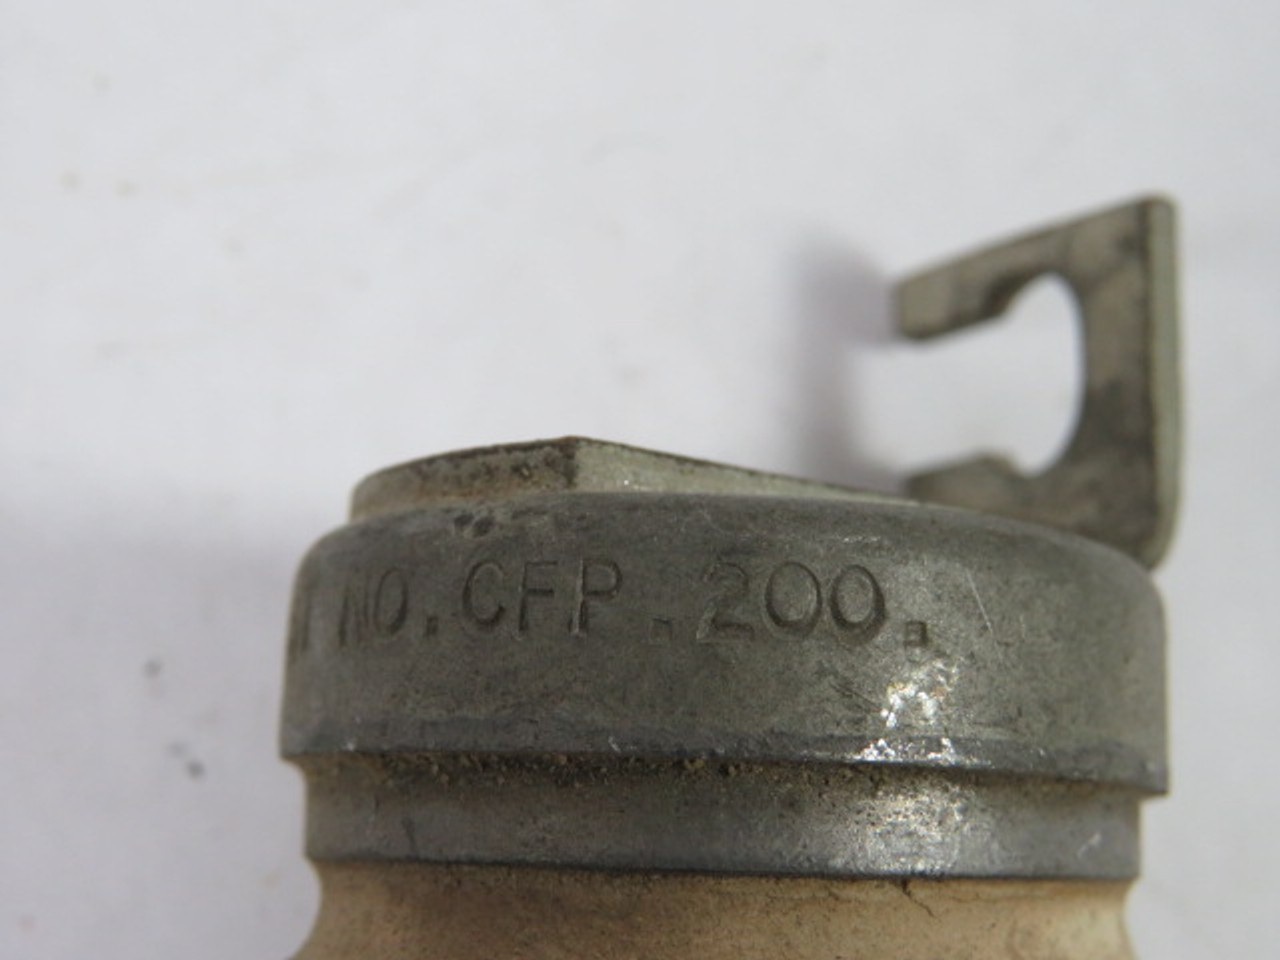 English Electric CFP-200A Fuse 200A 600V USED